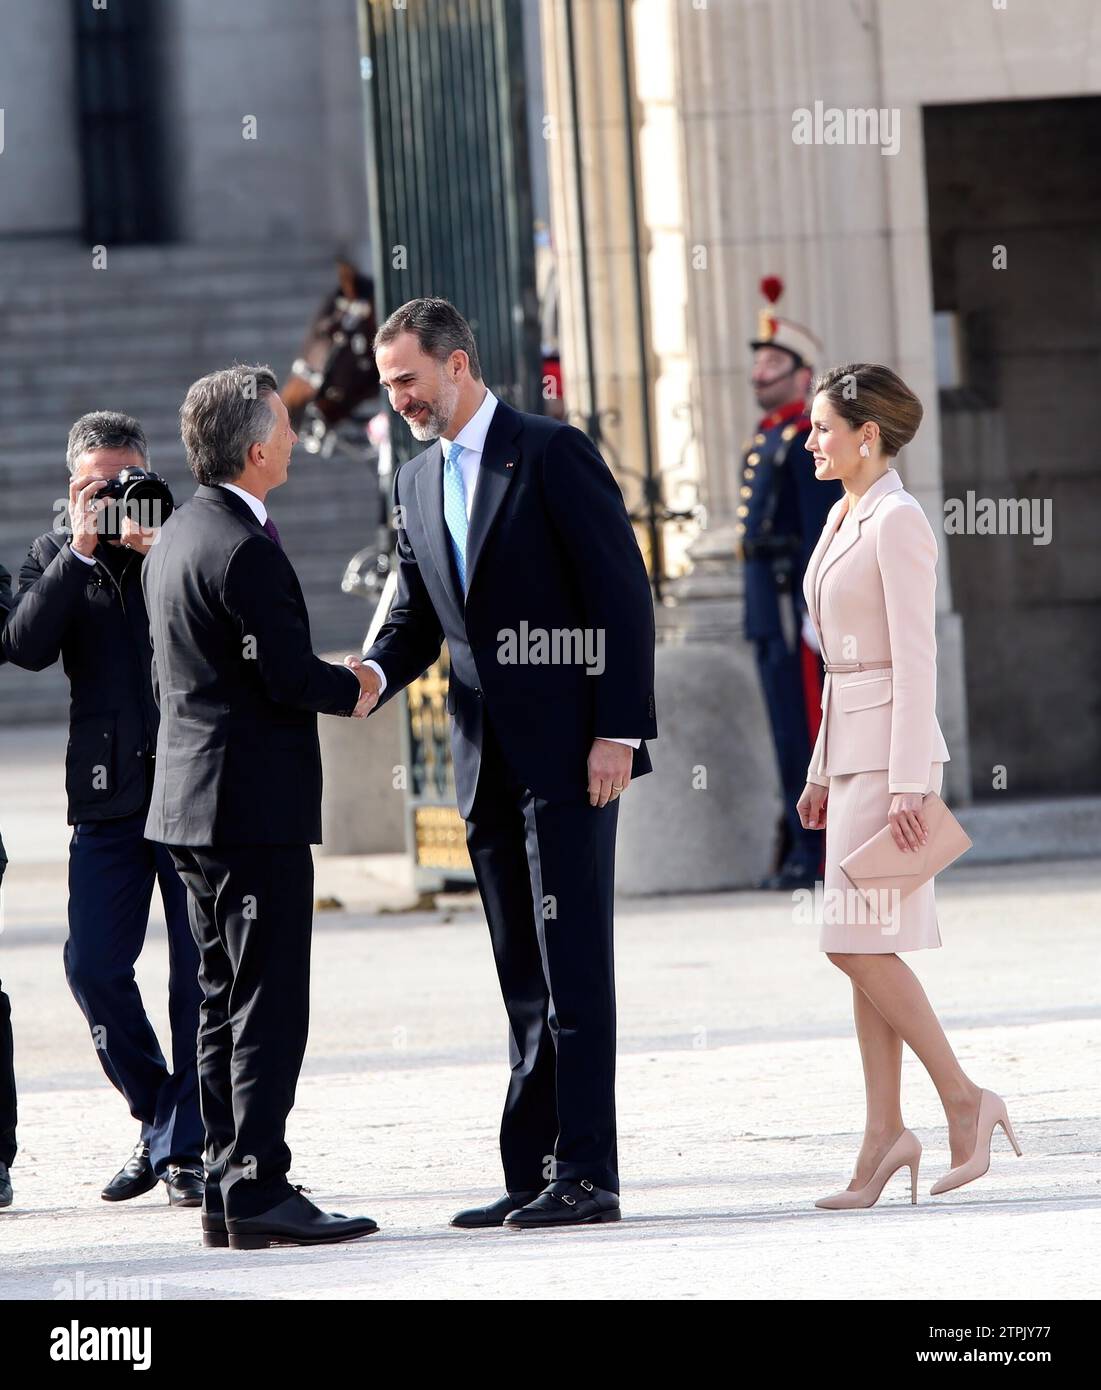 Madrid, 02/22/2017. Official visit of the president of Agentina Mauricio Macri. The president and his wife are received by His Majesty. the Kings in the Royal Palace. Photo: Ernesto Agudo. ARCHDC. Credit: Album / Archivo ABC / Ernesto Agudo Stock Photo